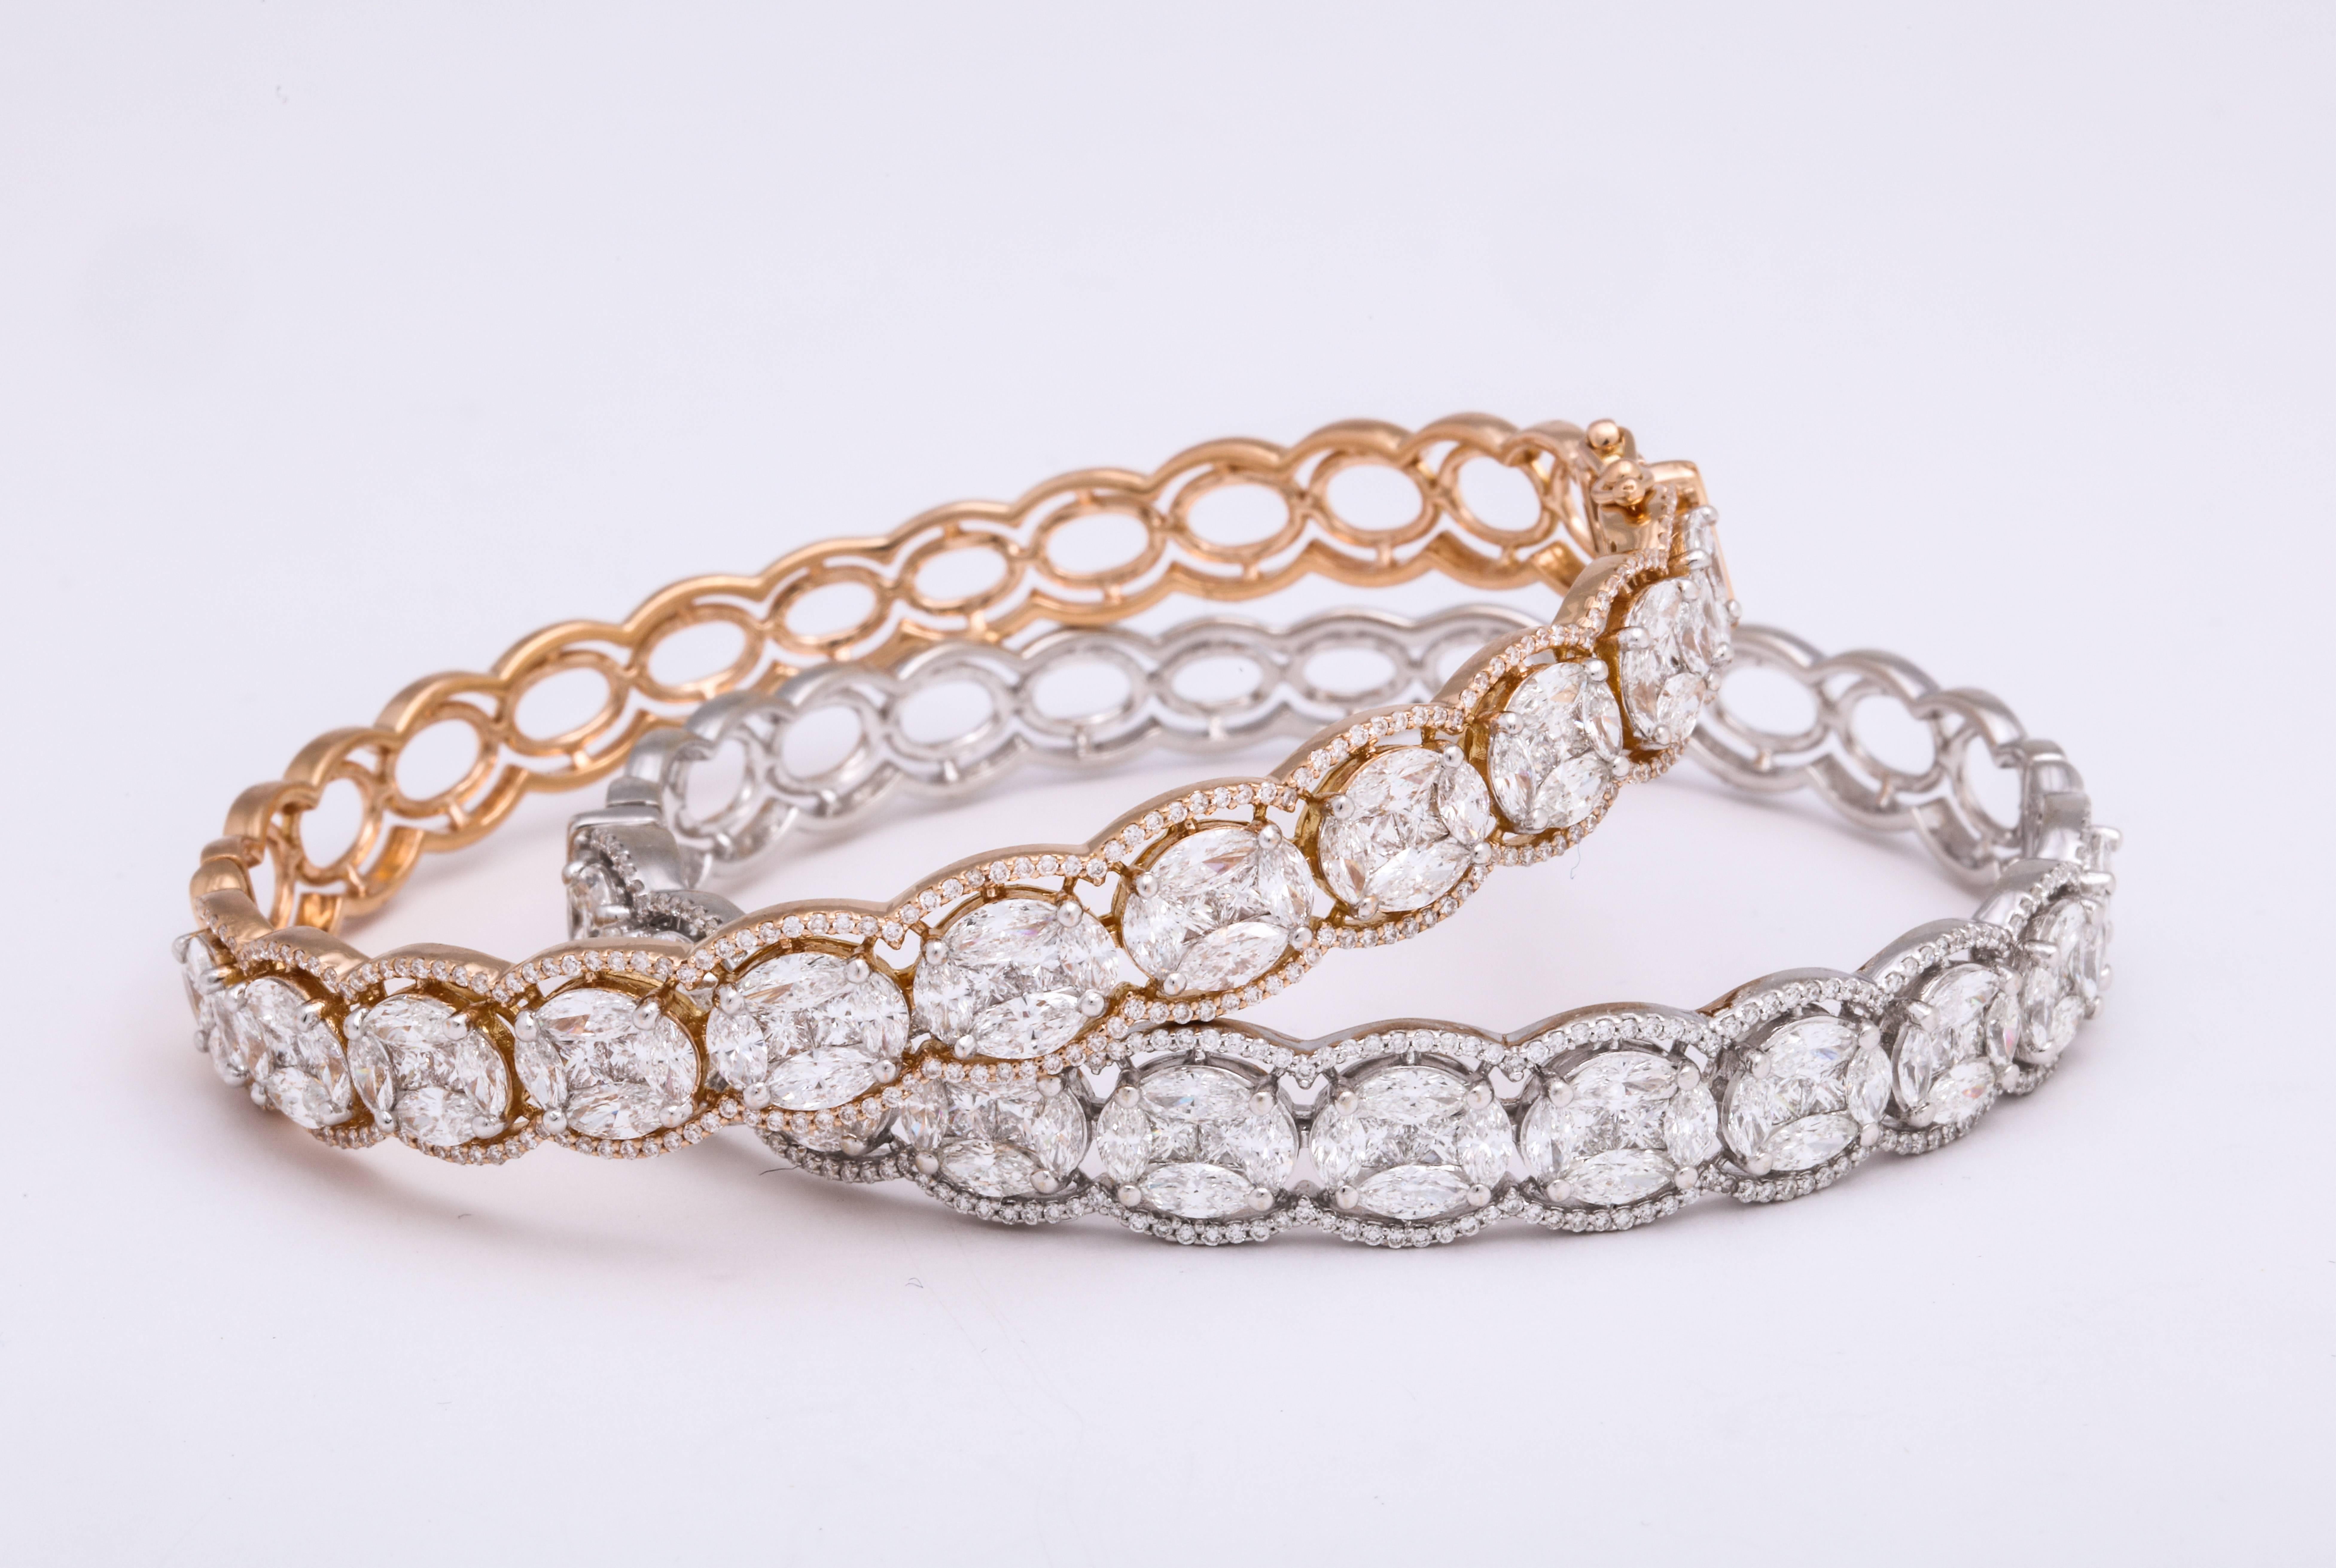 Classic design and details on this pair (sold as a set) of 18 Karat rose gold and matching 18 Karat white gold stack bracelets with hinge that open and close, each mounted with 11 oval stations set with princess cut and marquise diamonds in the